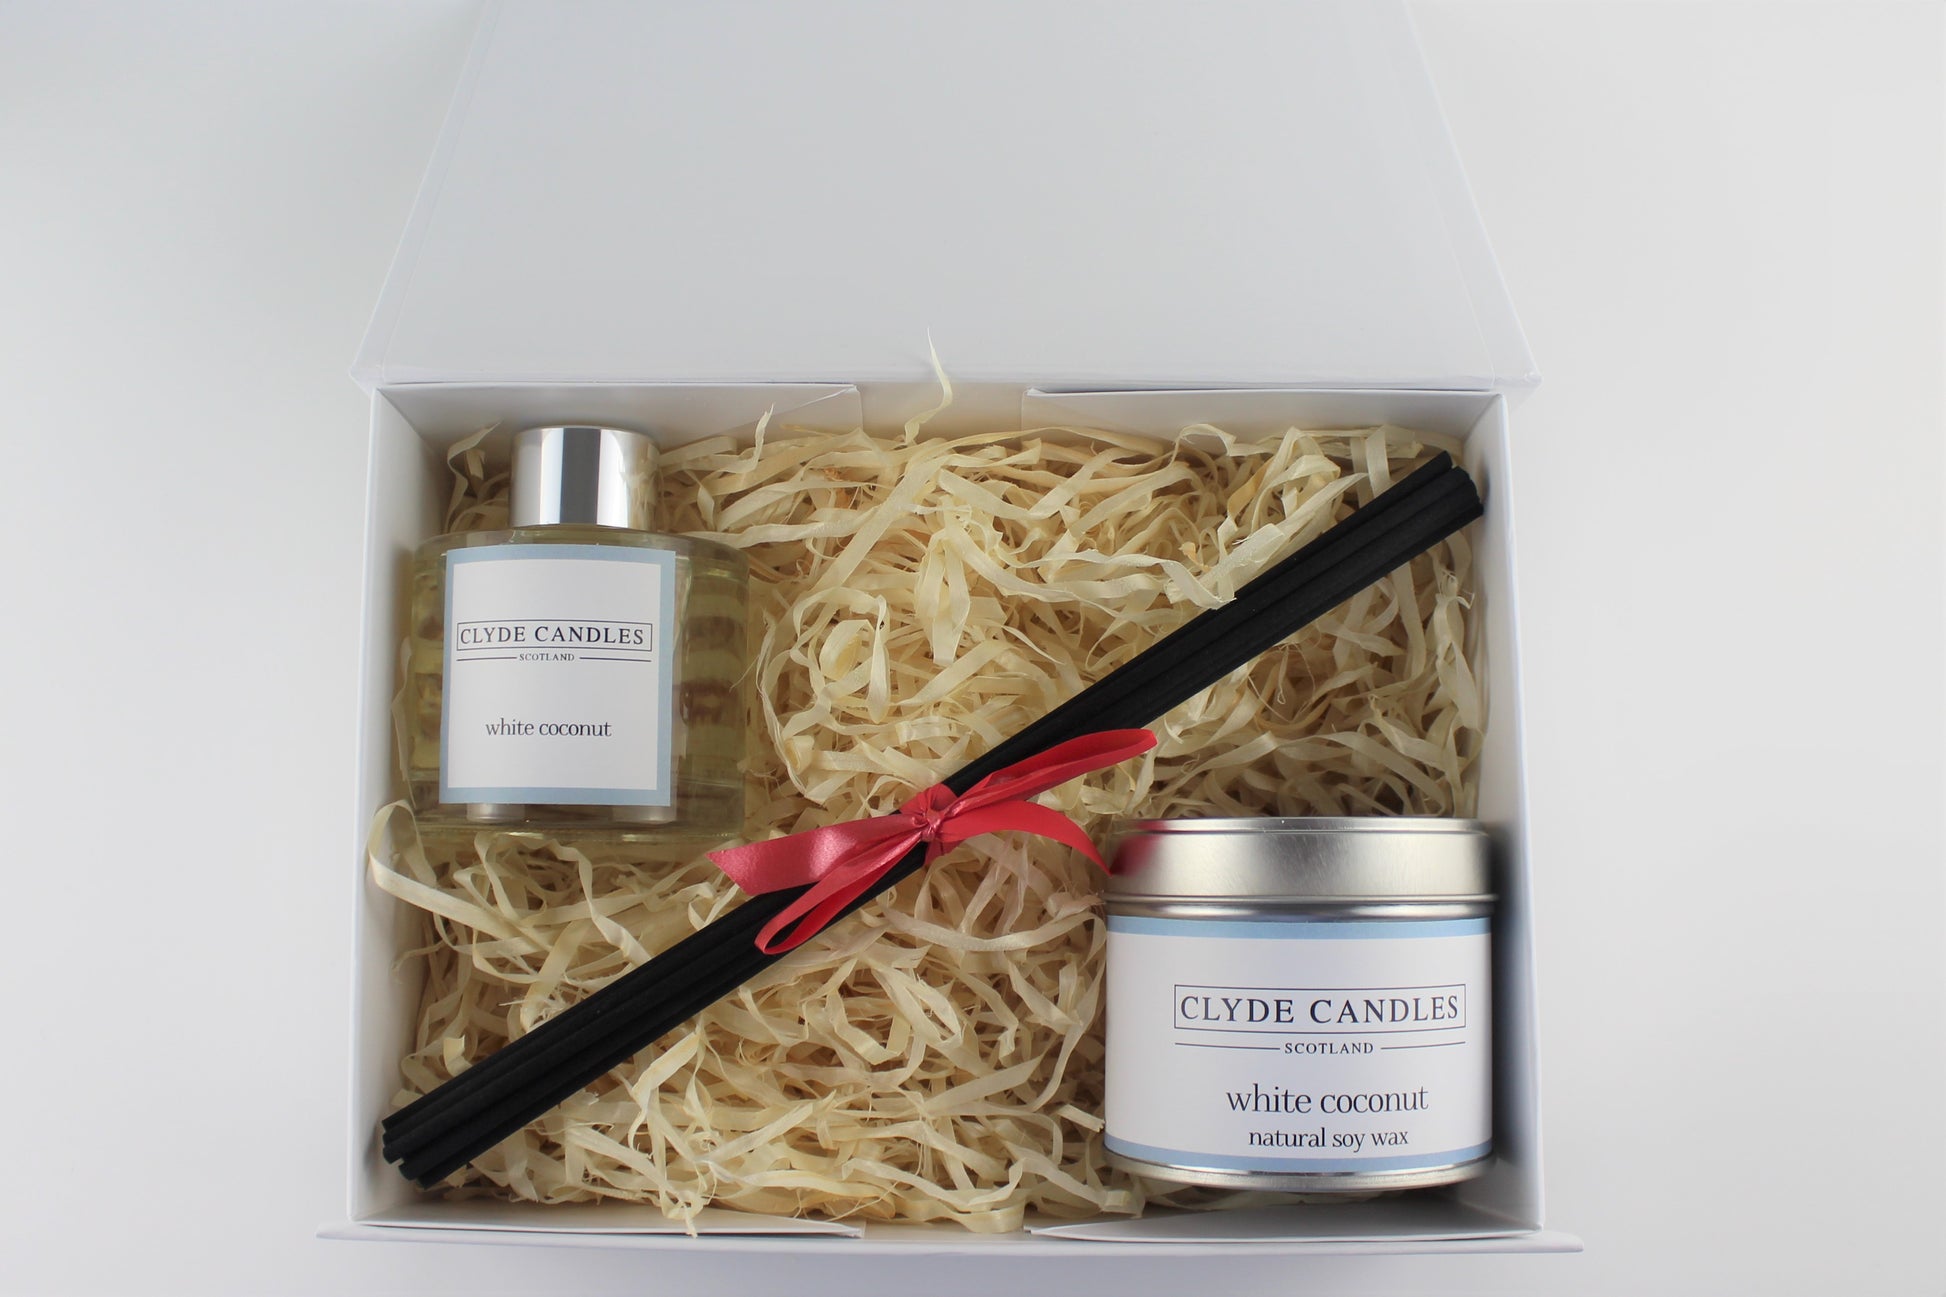 White Coconut Diffuser & Candle Gift Box Set - Scottish Natural Soy Candle